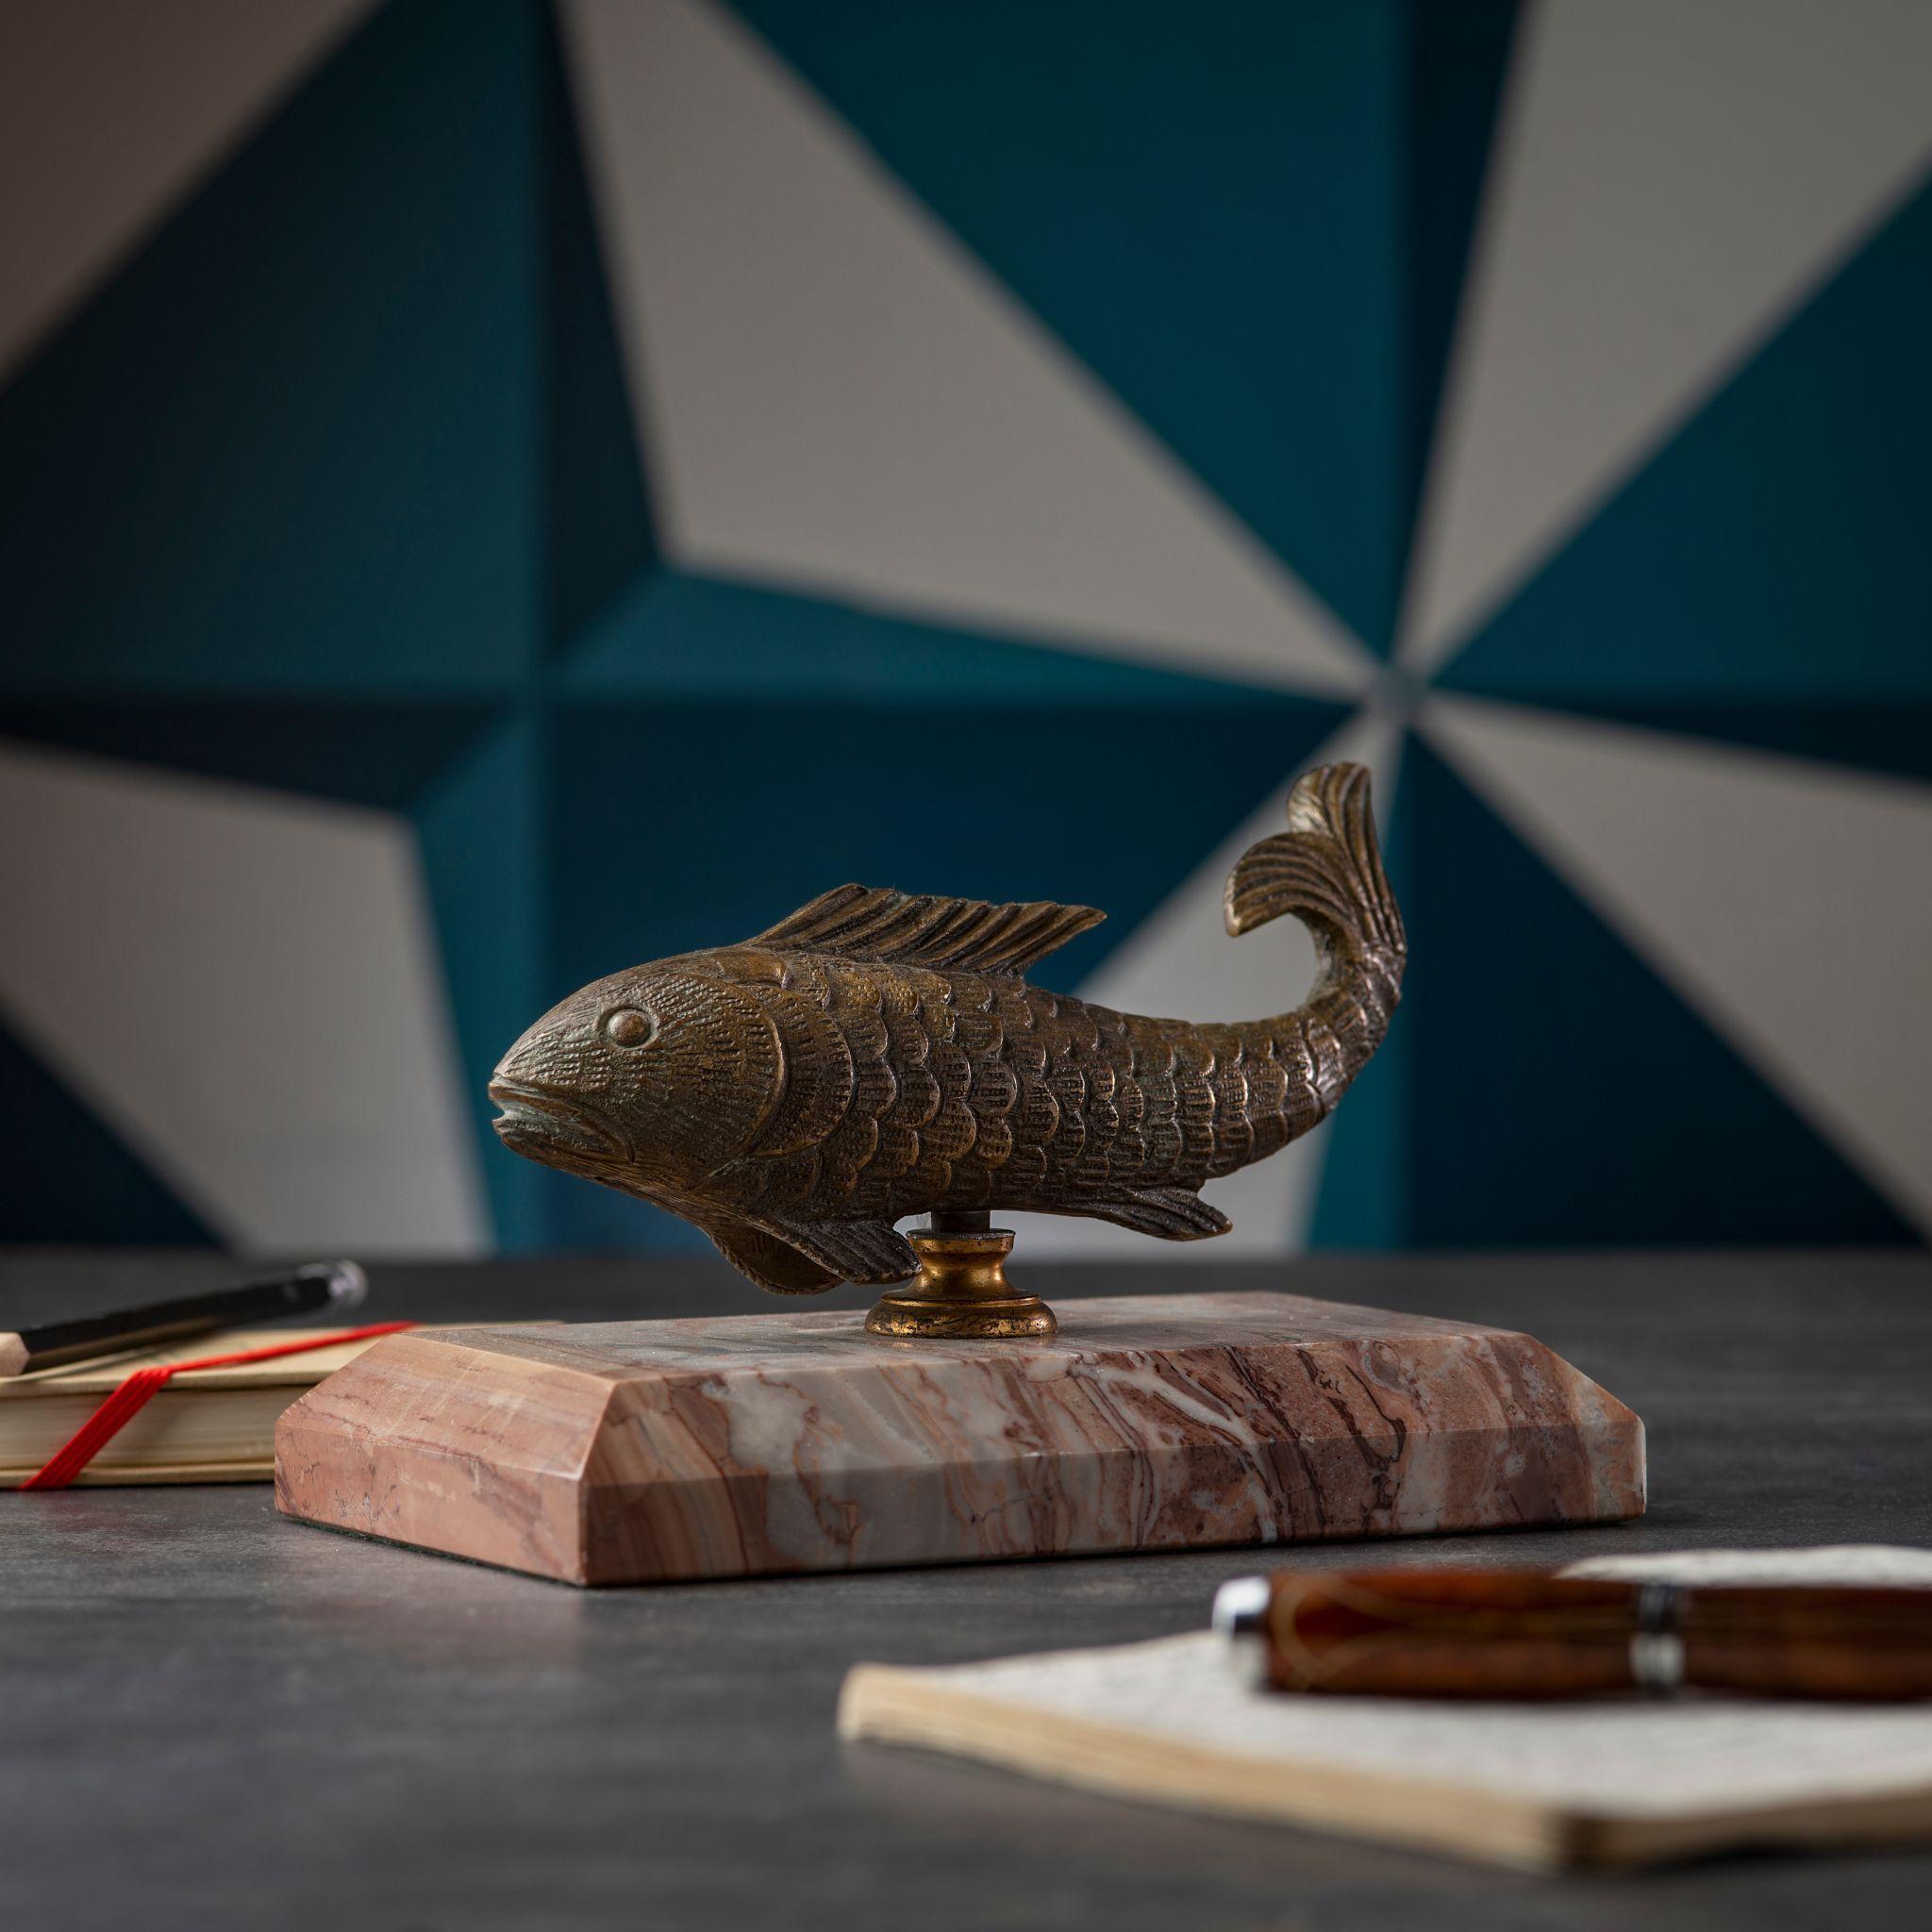 This stunning brass fish figurine with a beige marble base is a unique and eye-catching decorative piece. Handmade with care and attention to detail, this brass sculpture adds a touch of elegance and sophistication to any room. Its intricate design